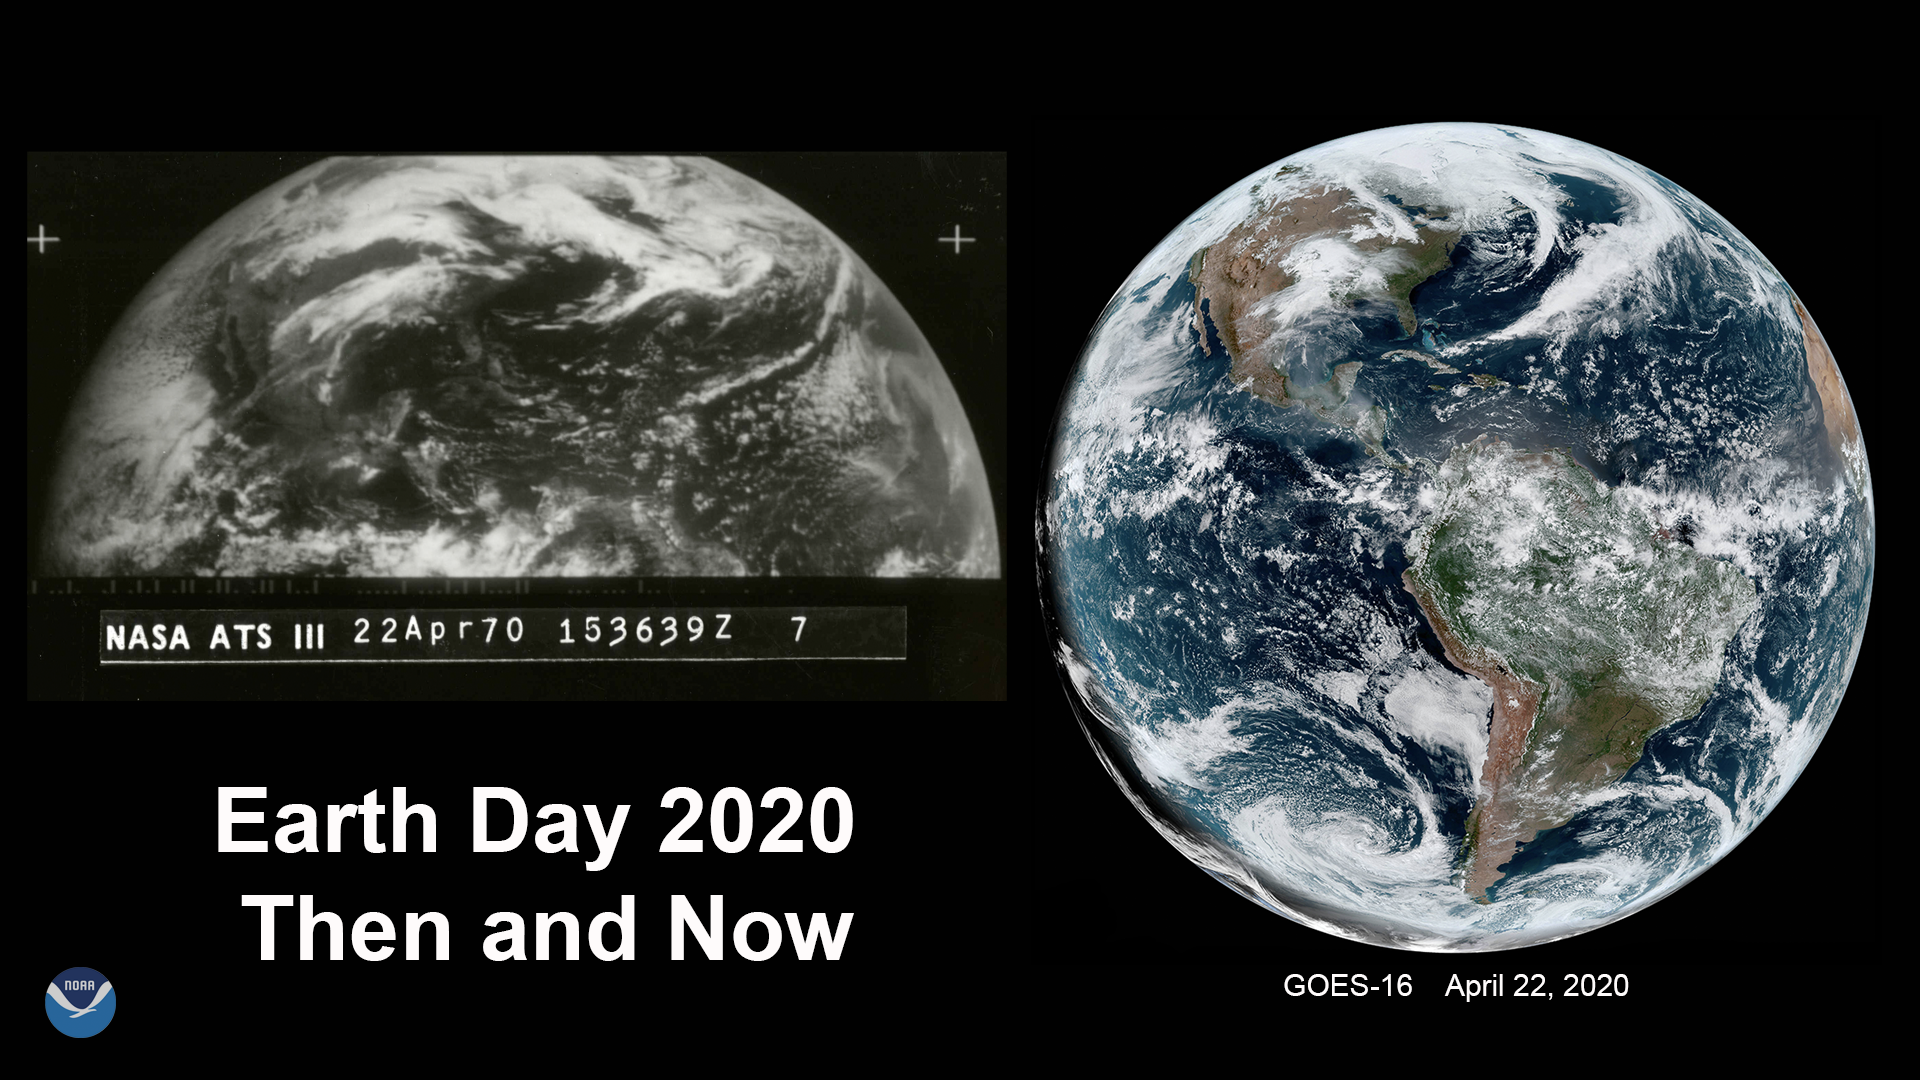 Still Inspiring After 50 Years: Earth Day Images Then and Now